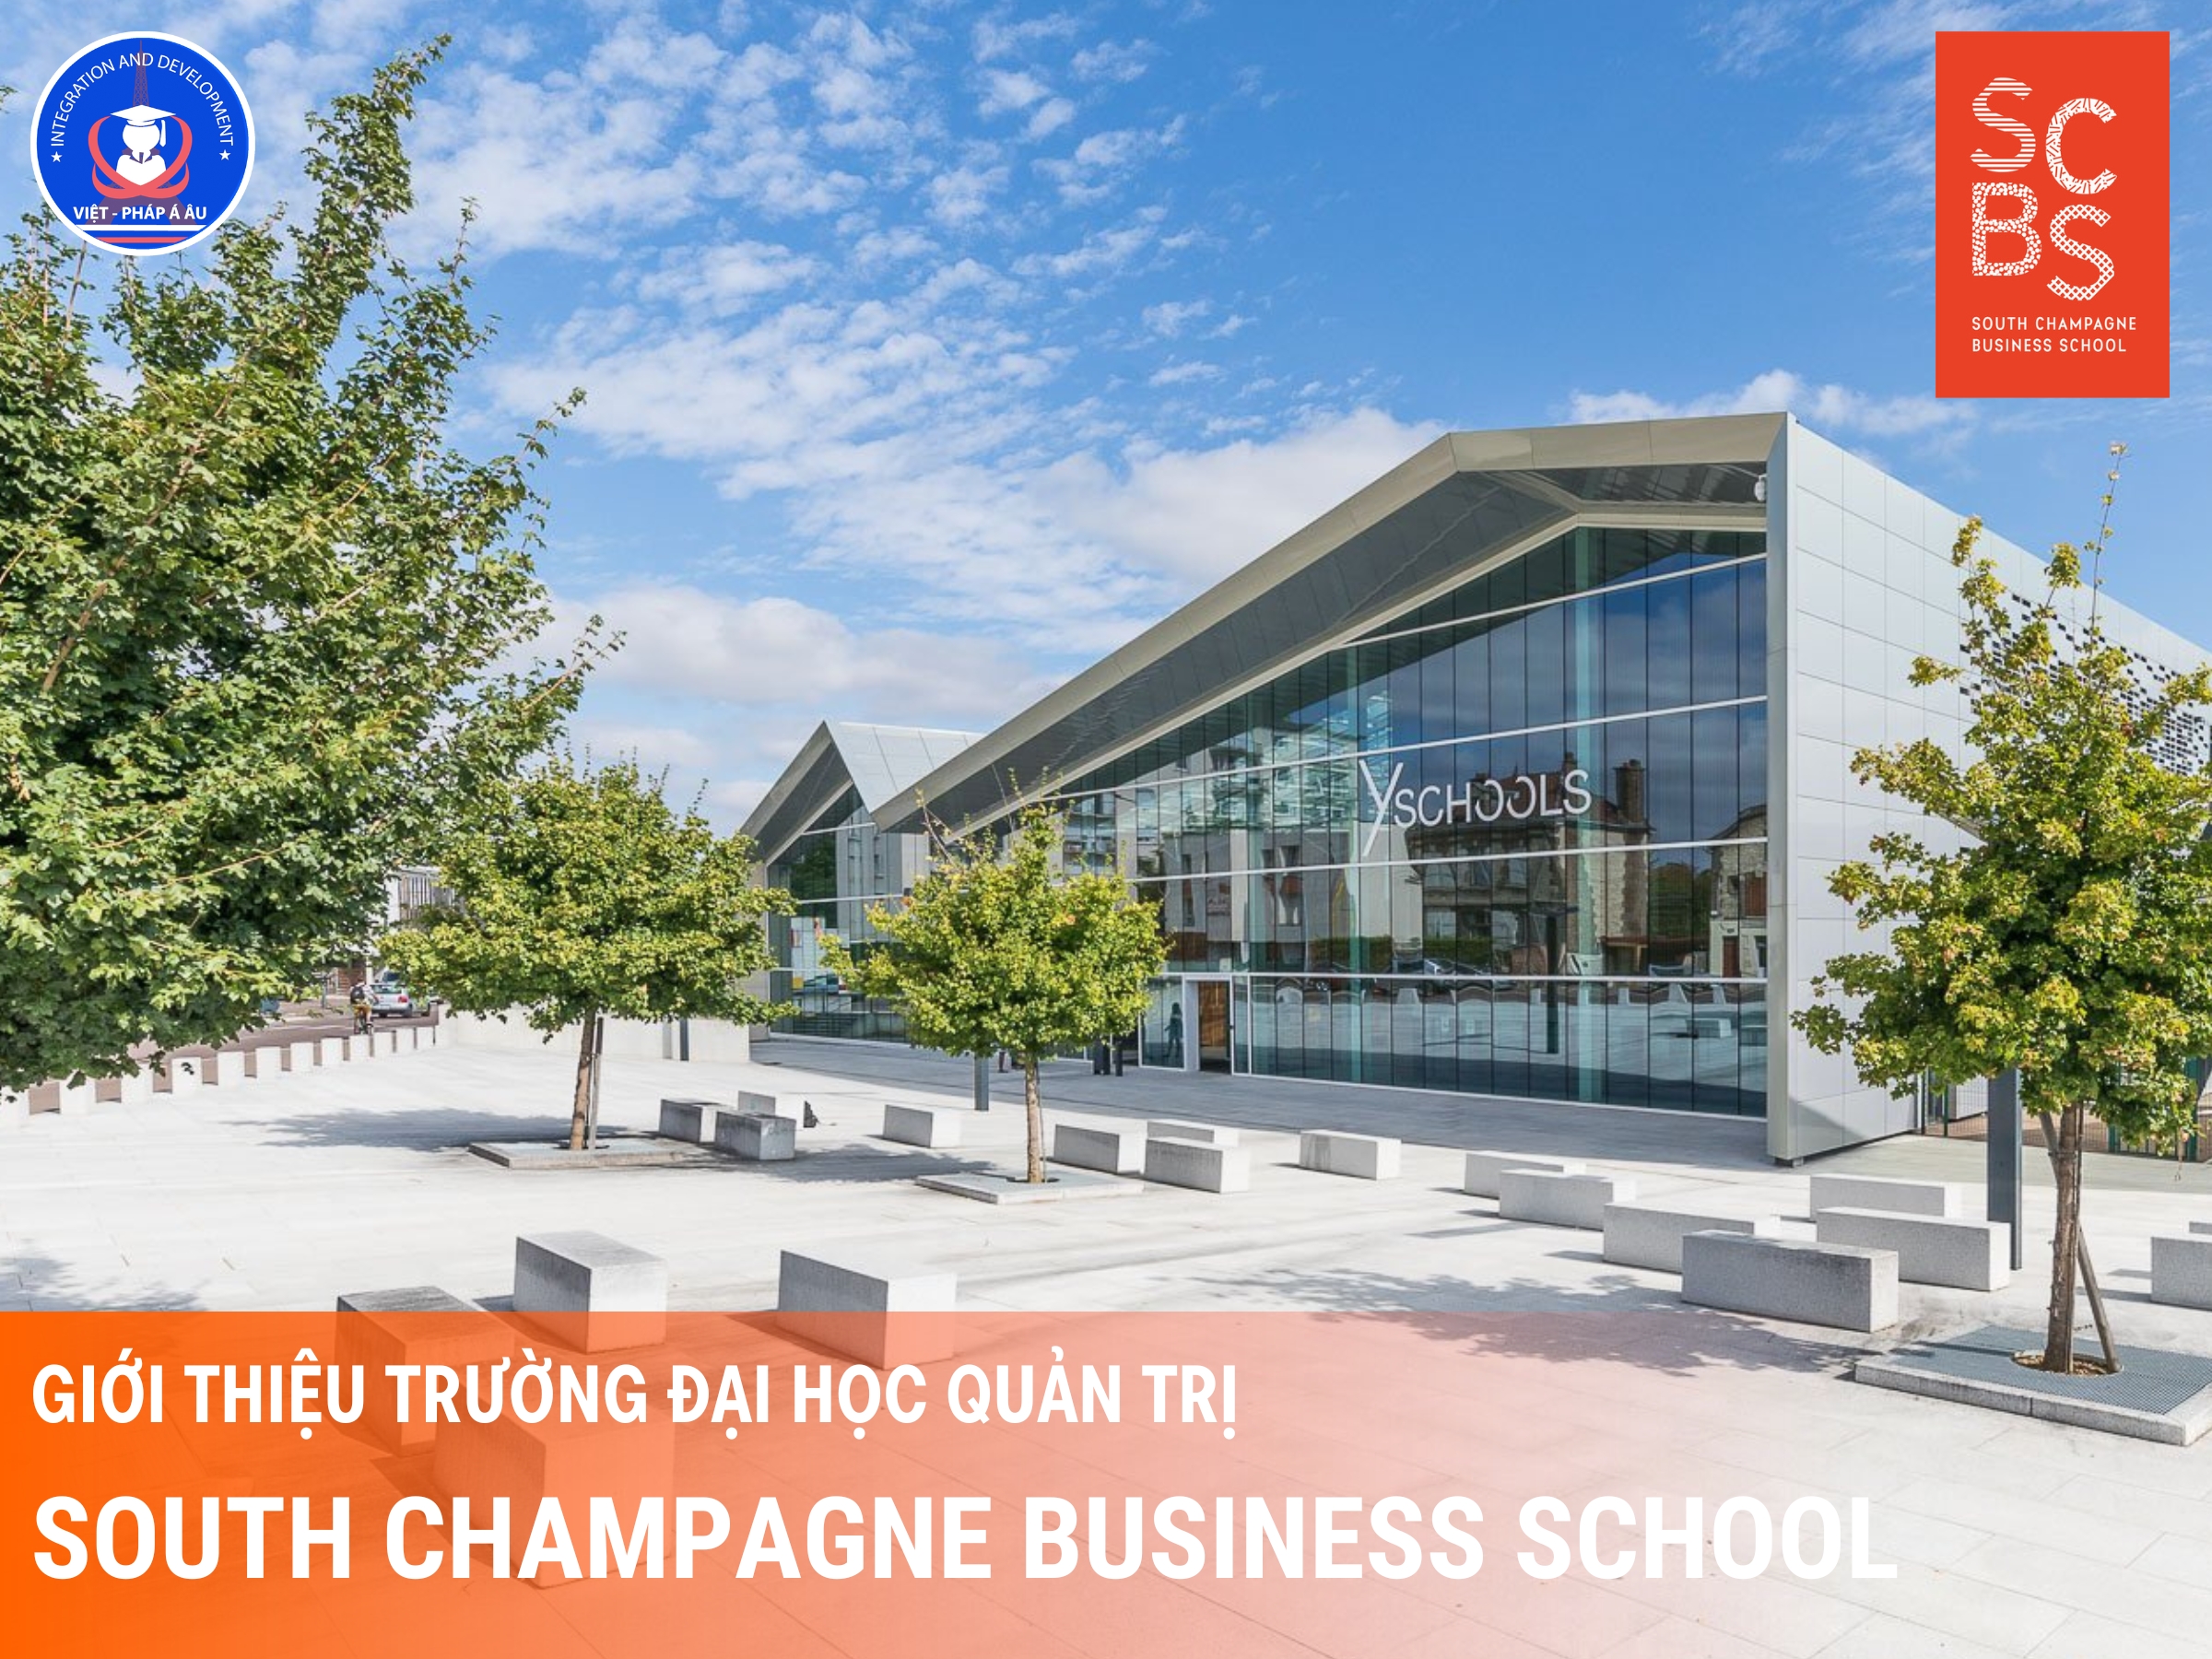 SOUTH CHAMPAGNE BUSINESS SCHOOL